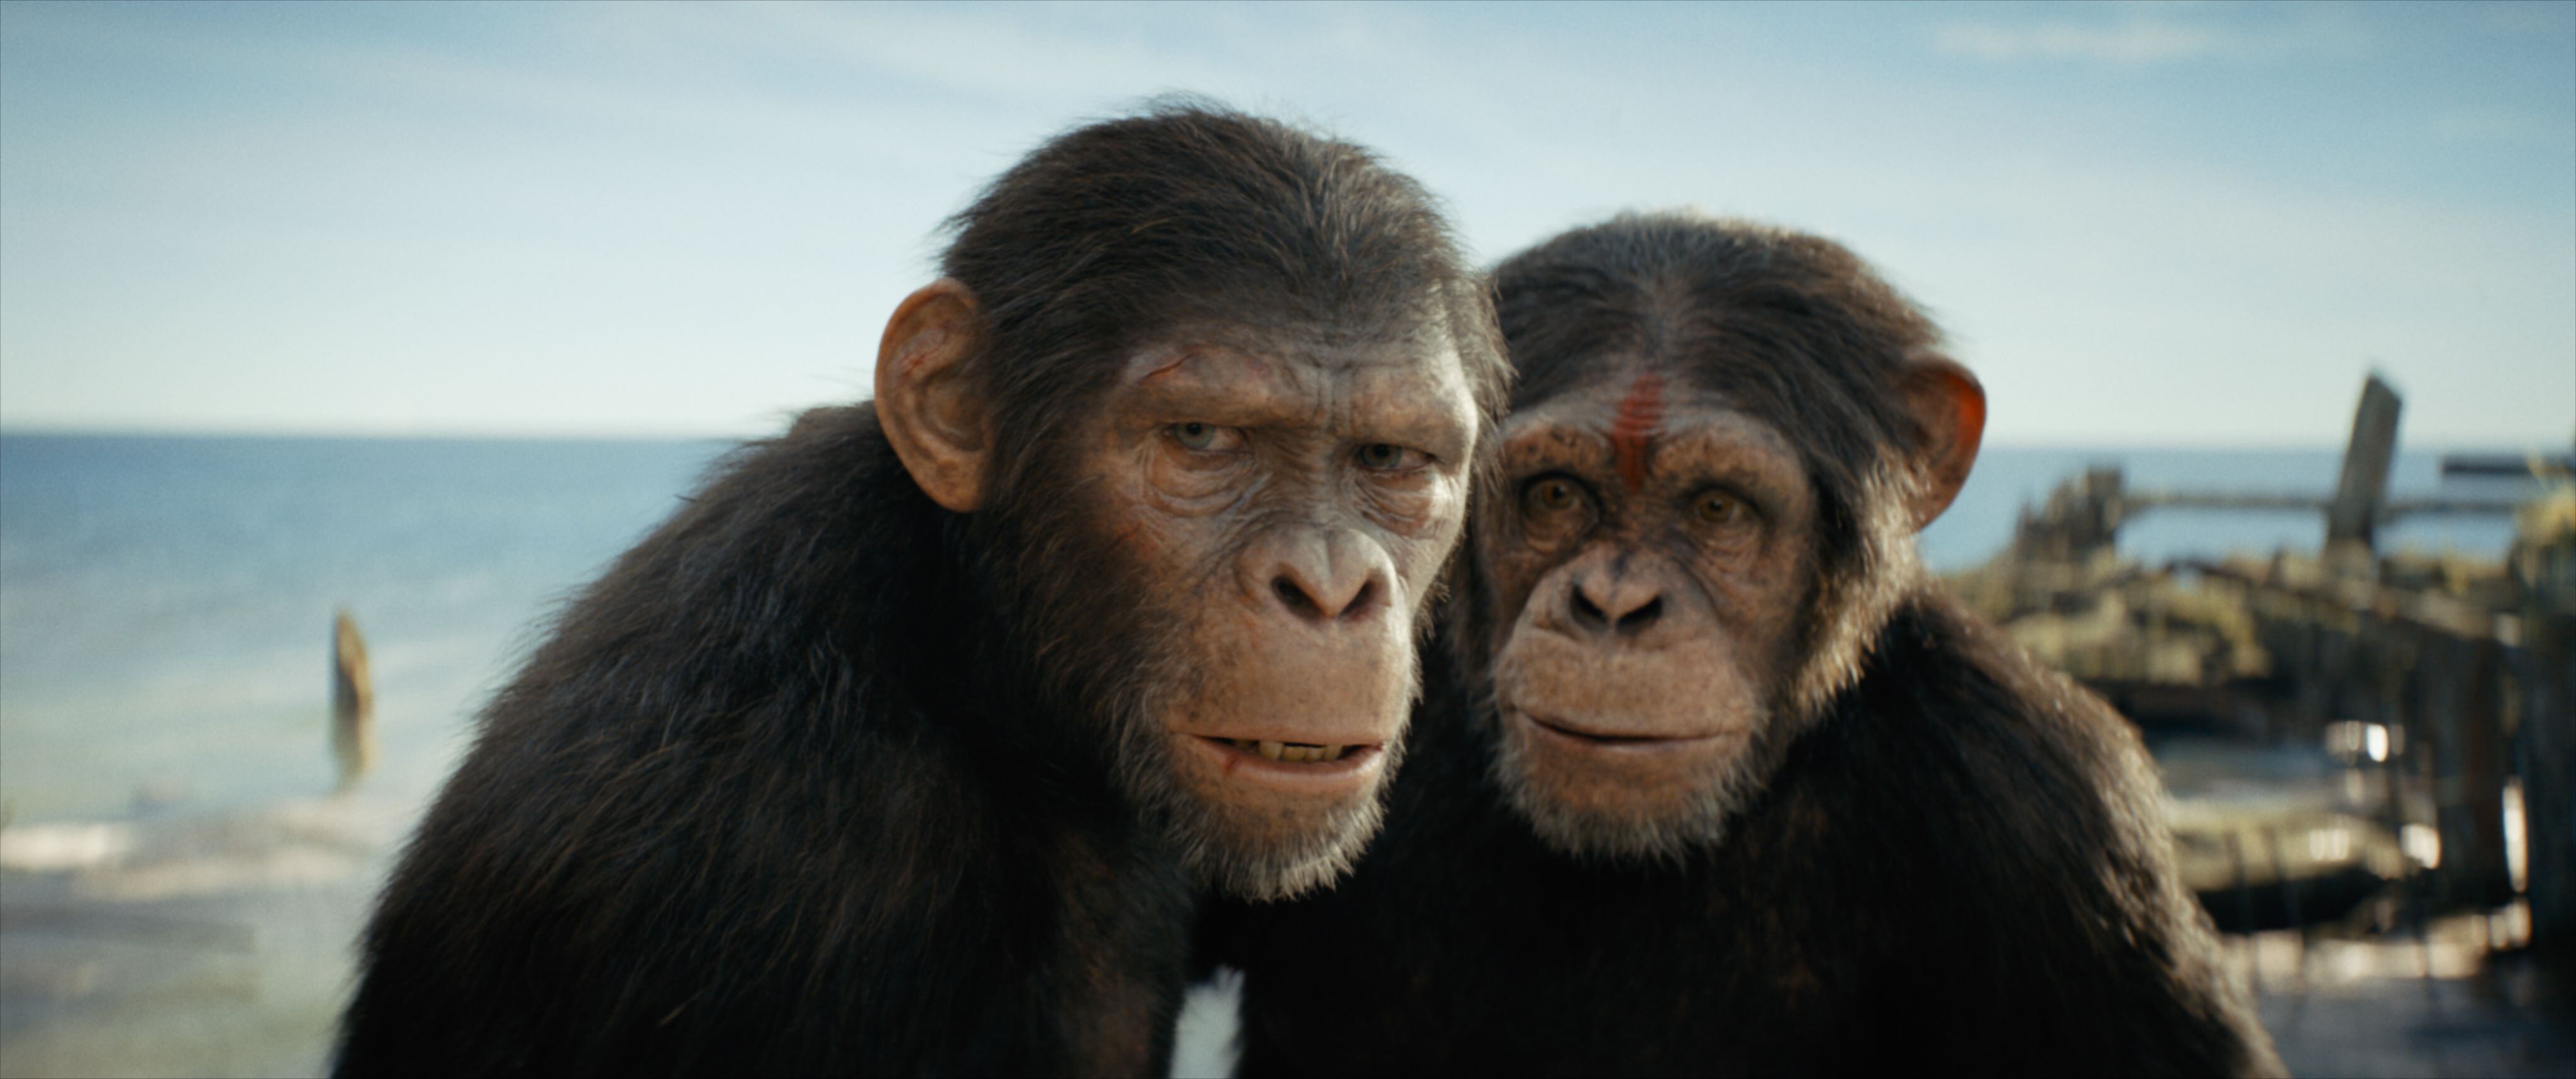 (L-R) Noa (played by Owen Teague) and Dar (played by Sara Wiseman) in 20th Century Studios' KINGDOM OF THE PLANET OF THE APES. Photo courtesy of 20th Century Studios. © 2024 20th Century Studios. All Rights Reserved.